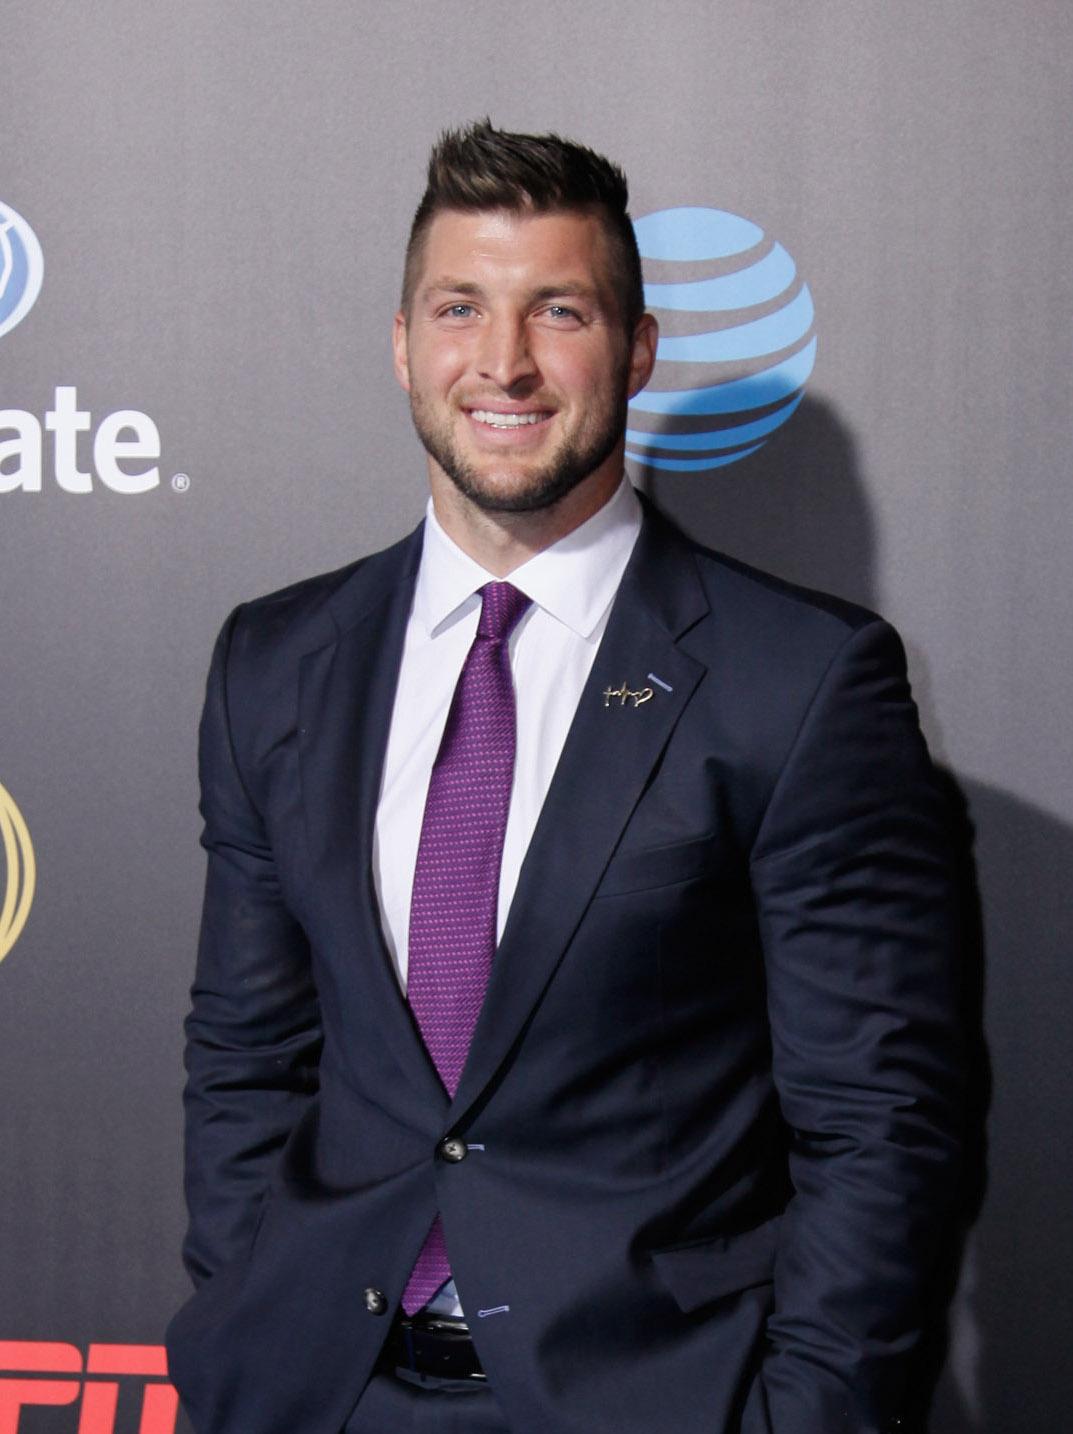 Tebow attends the Allstate party at the Playoff Blue Carpet in Phoenix, Arizona, on Jan. 9, 2016 (Mike Moore/Getty Images)